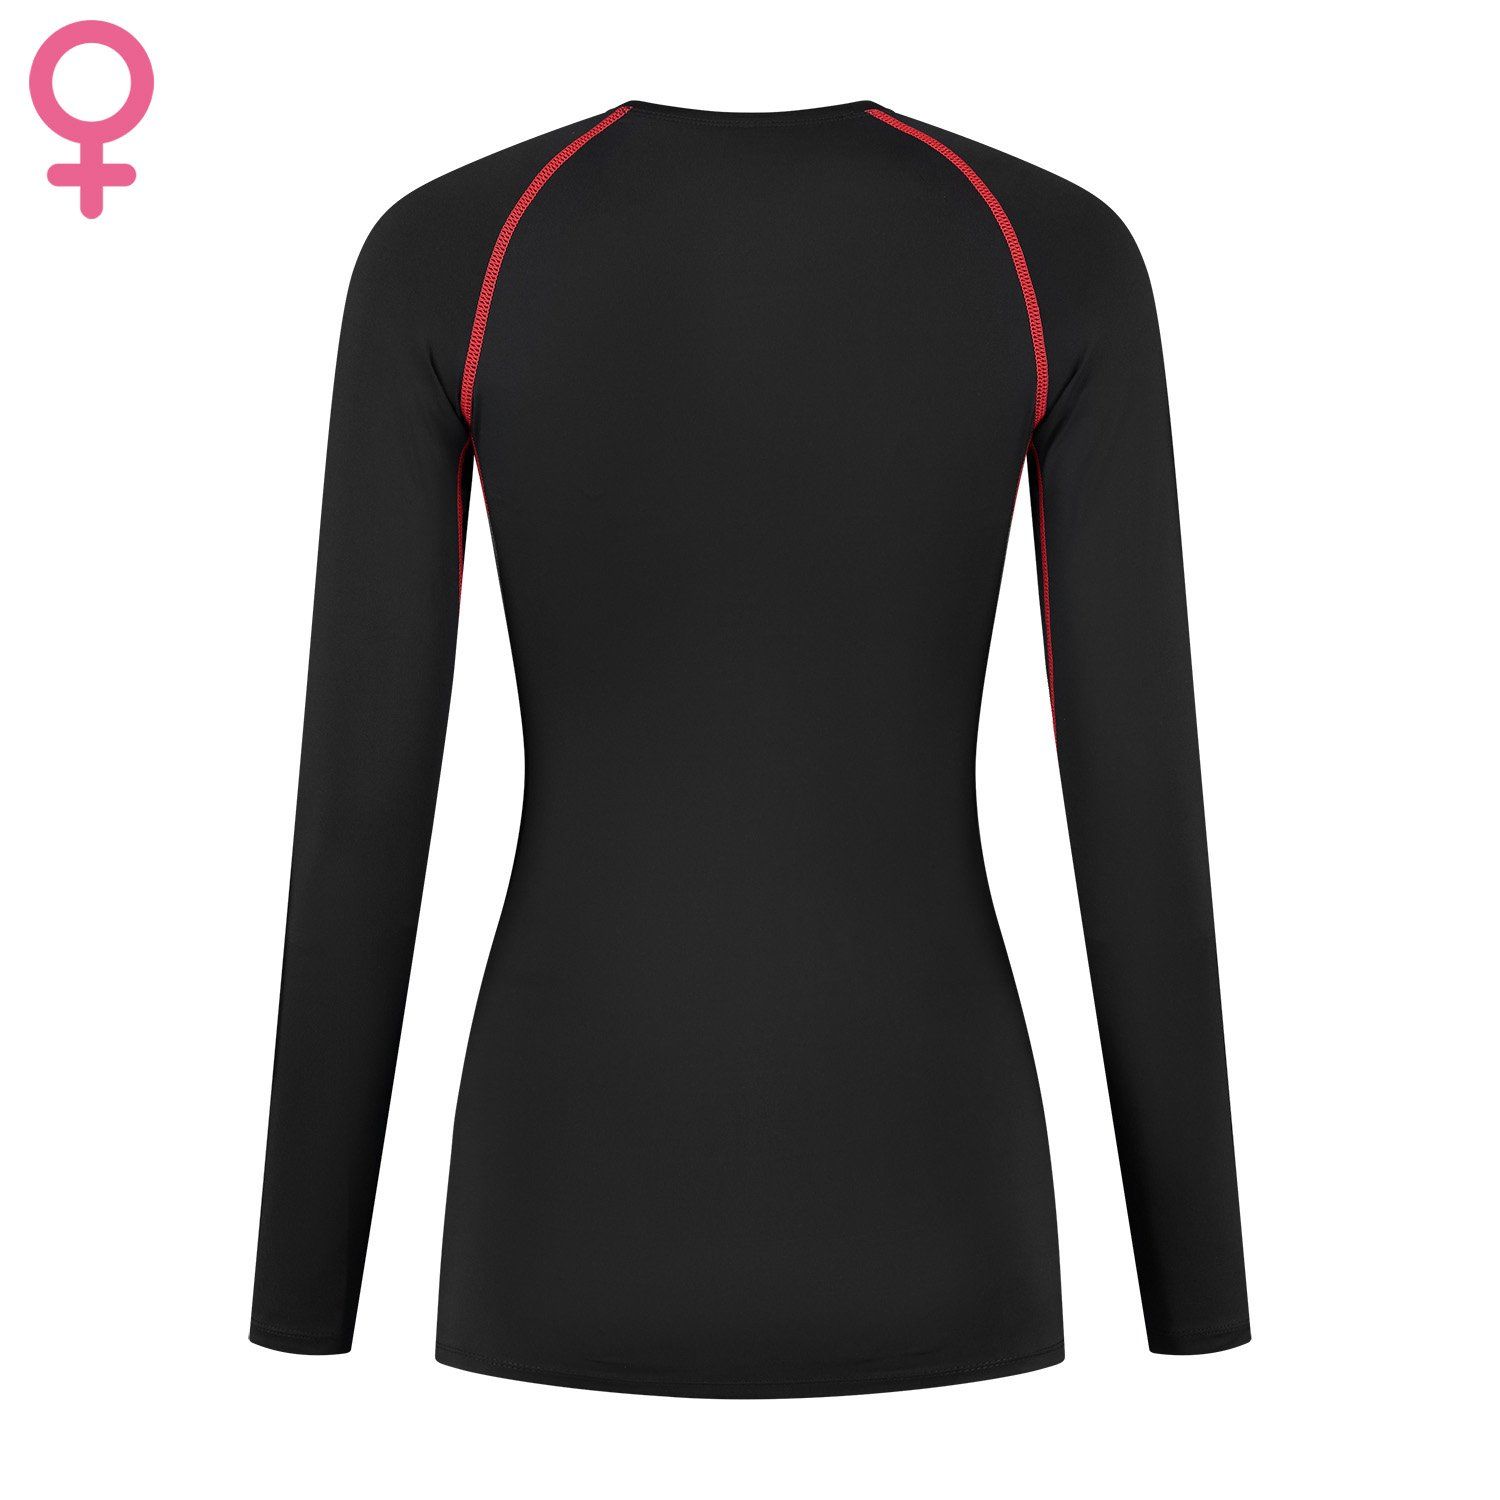 gladiator sports longsleeve compression top for woman back